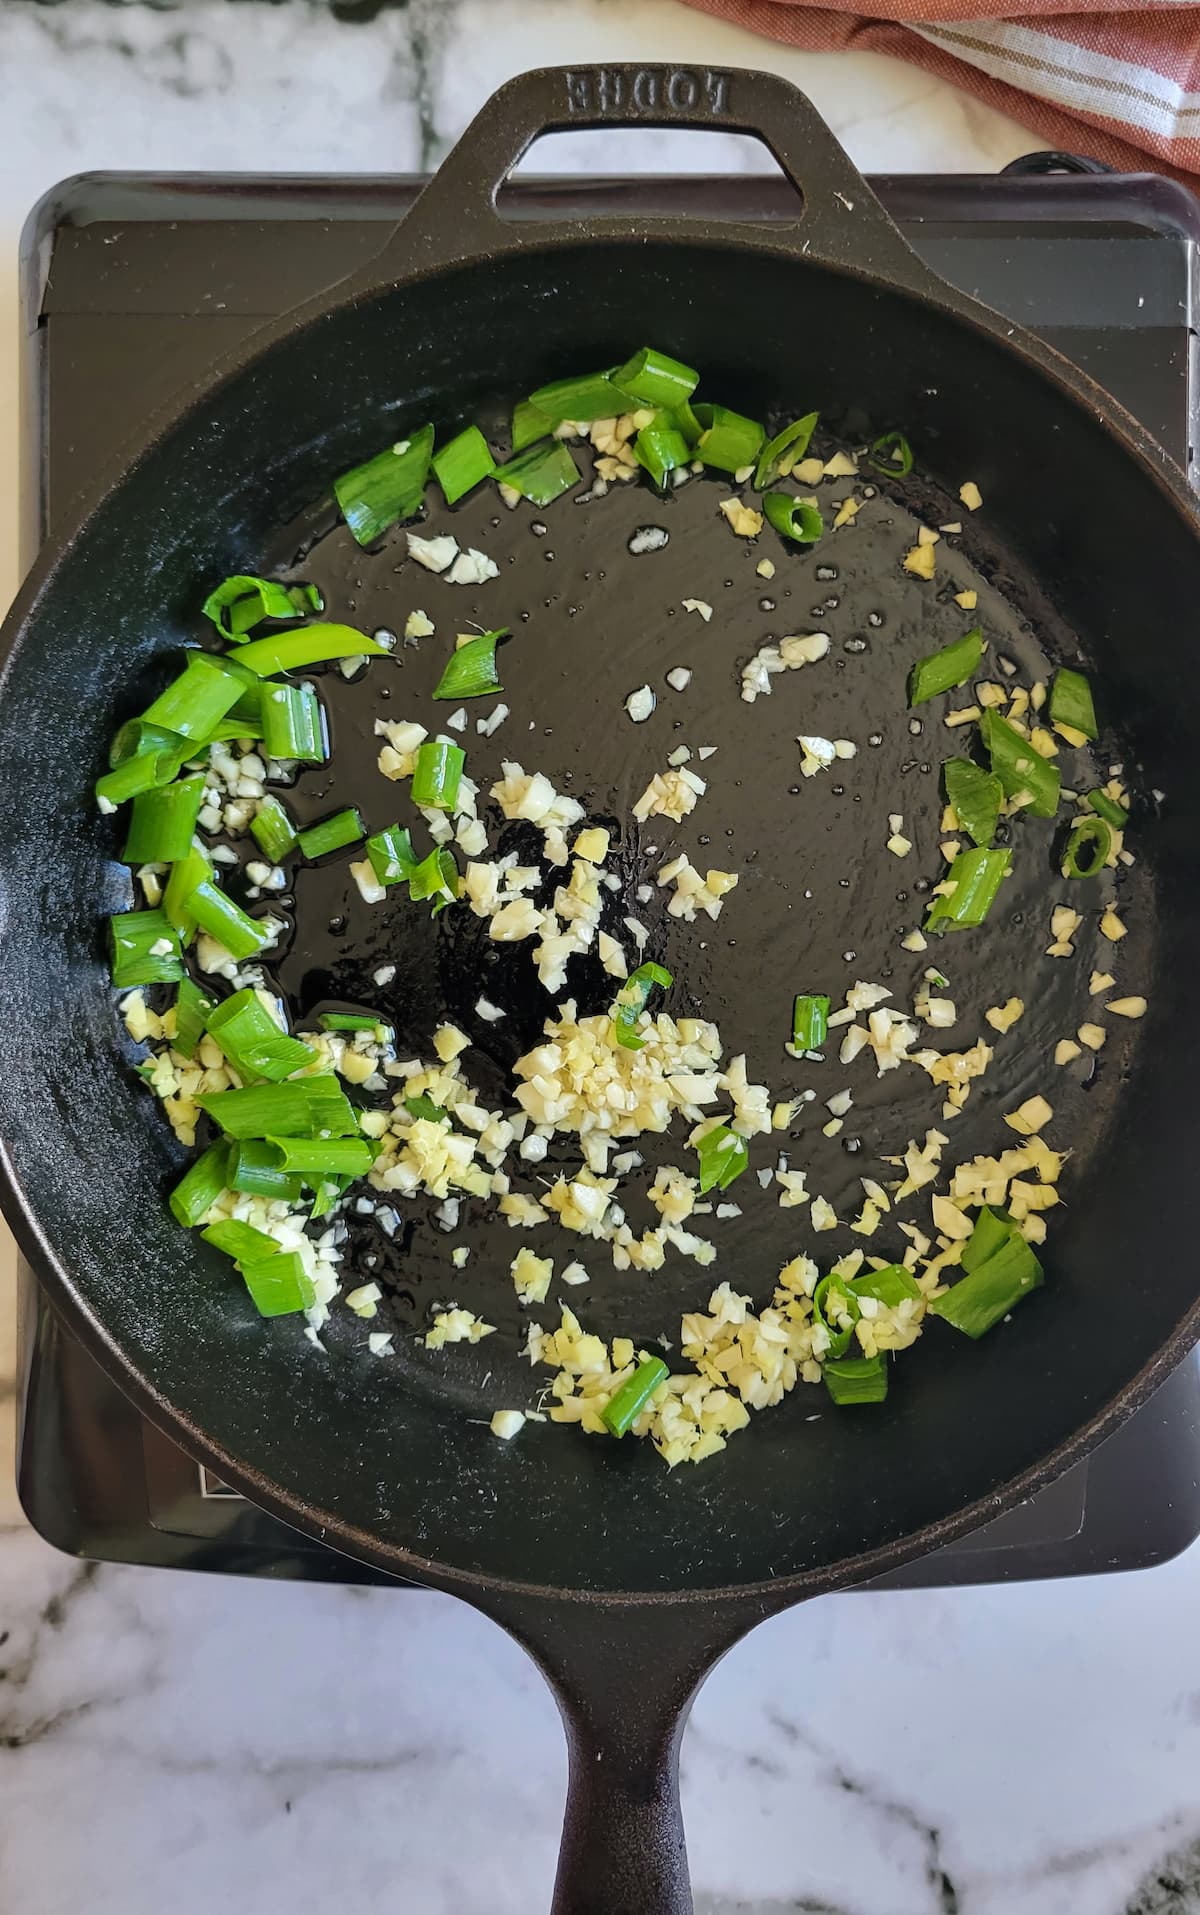 minced garlic, ginger and green onions cooking in a cast iron skillet on a burner